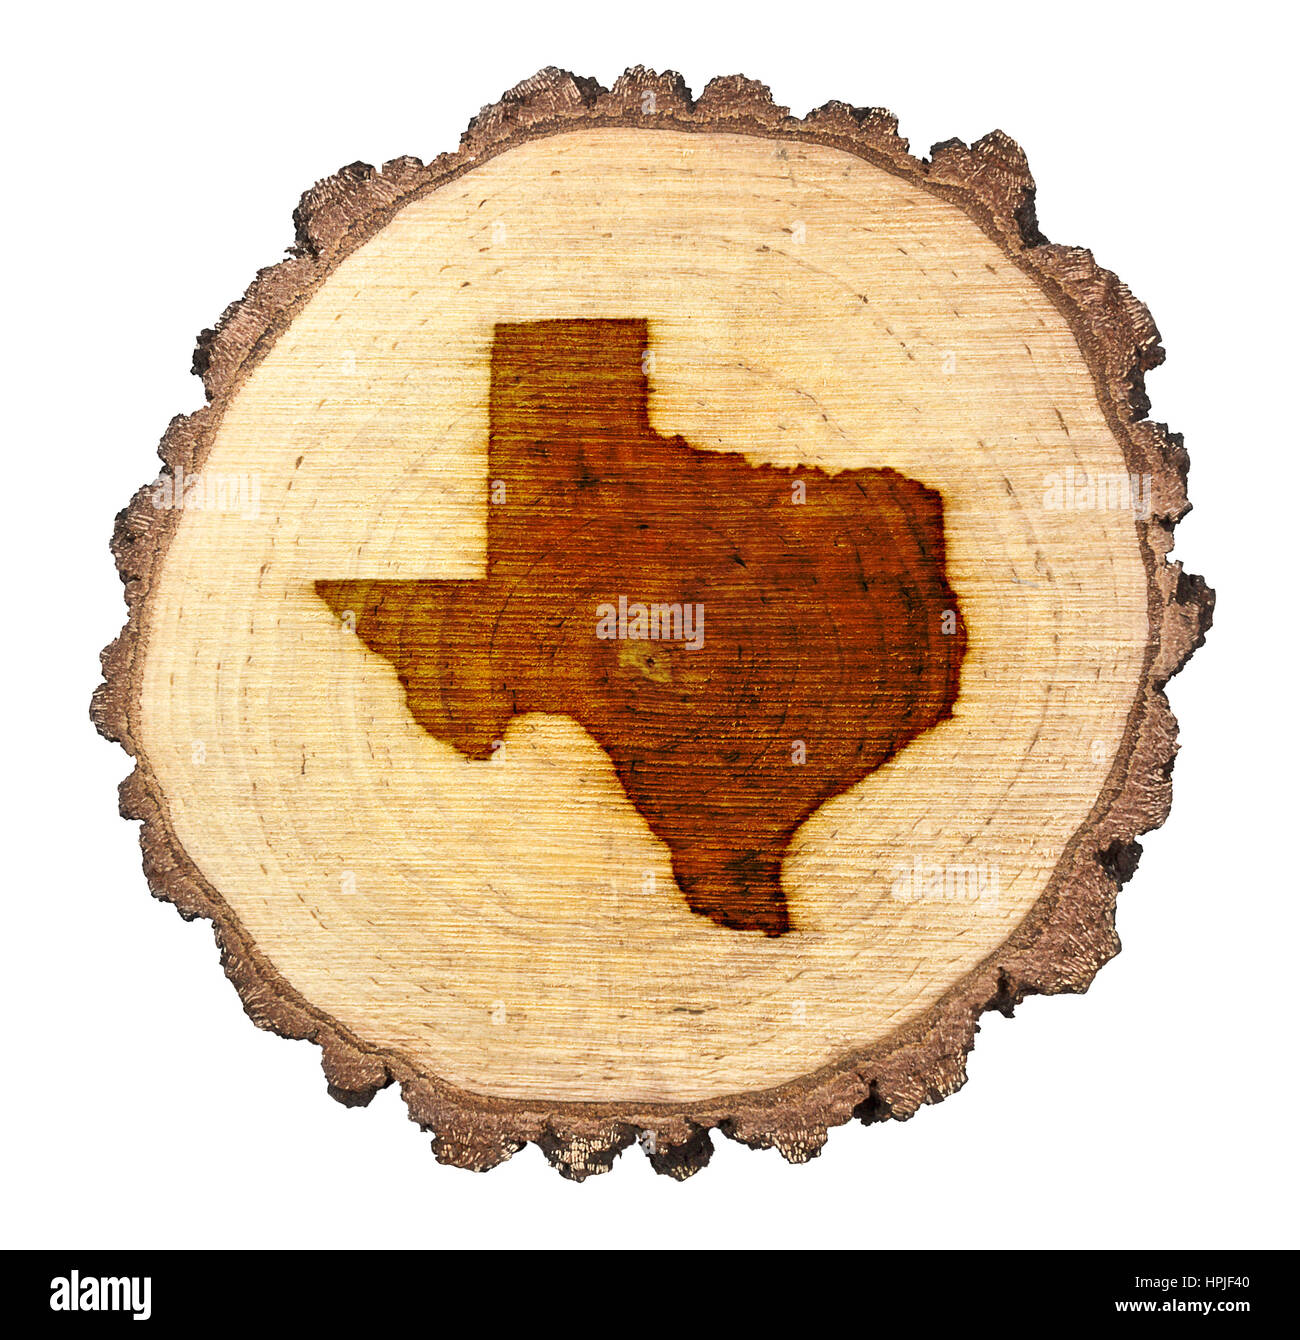 A slice of oak and the shape of Texas branded onto .(series) Stock Photo